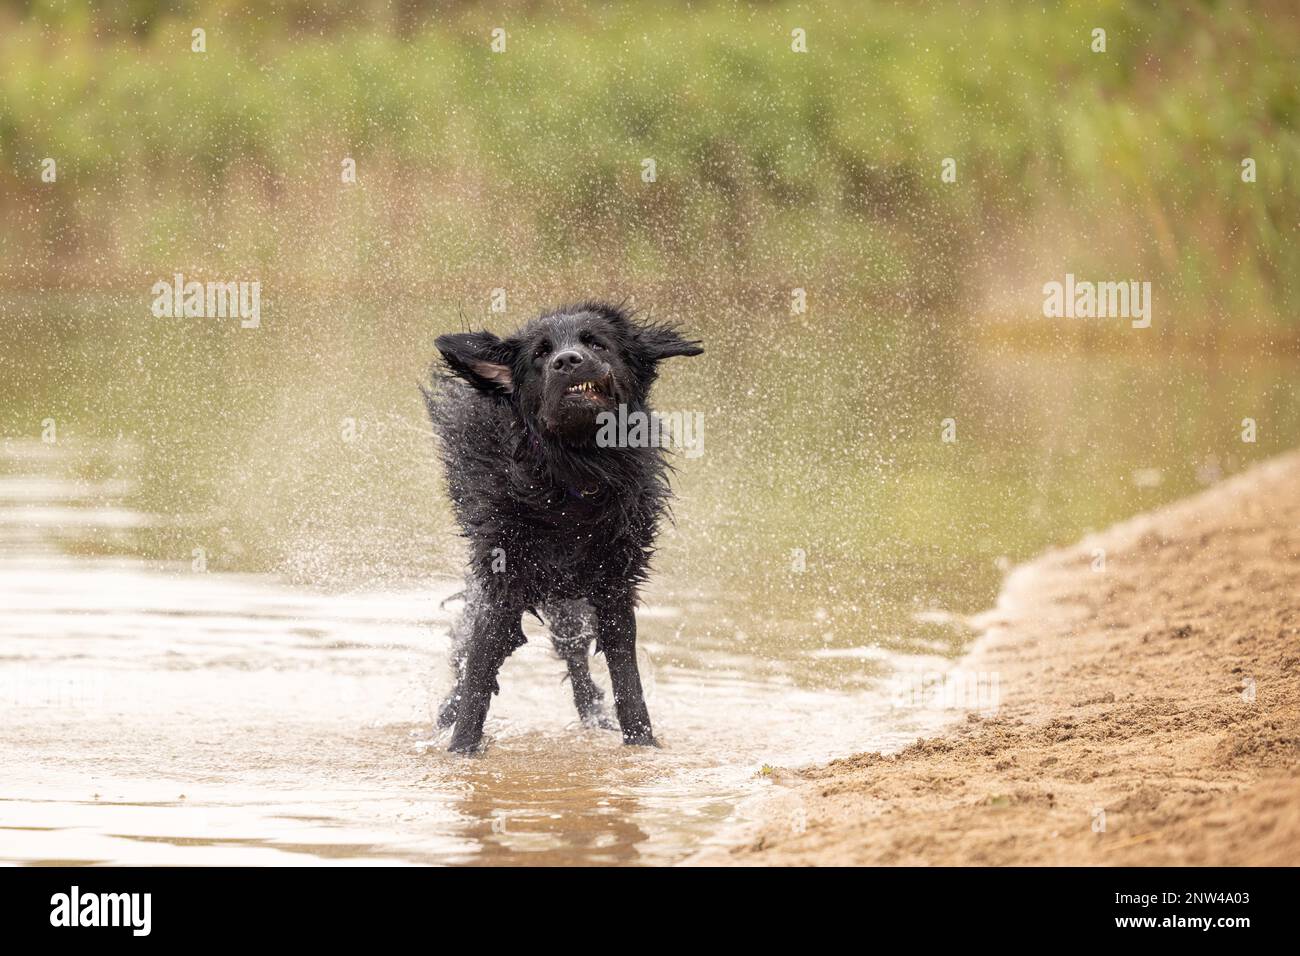 A wet newfoundland dog shaking in shallow water Stock Photo